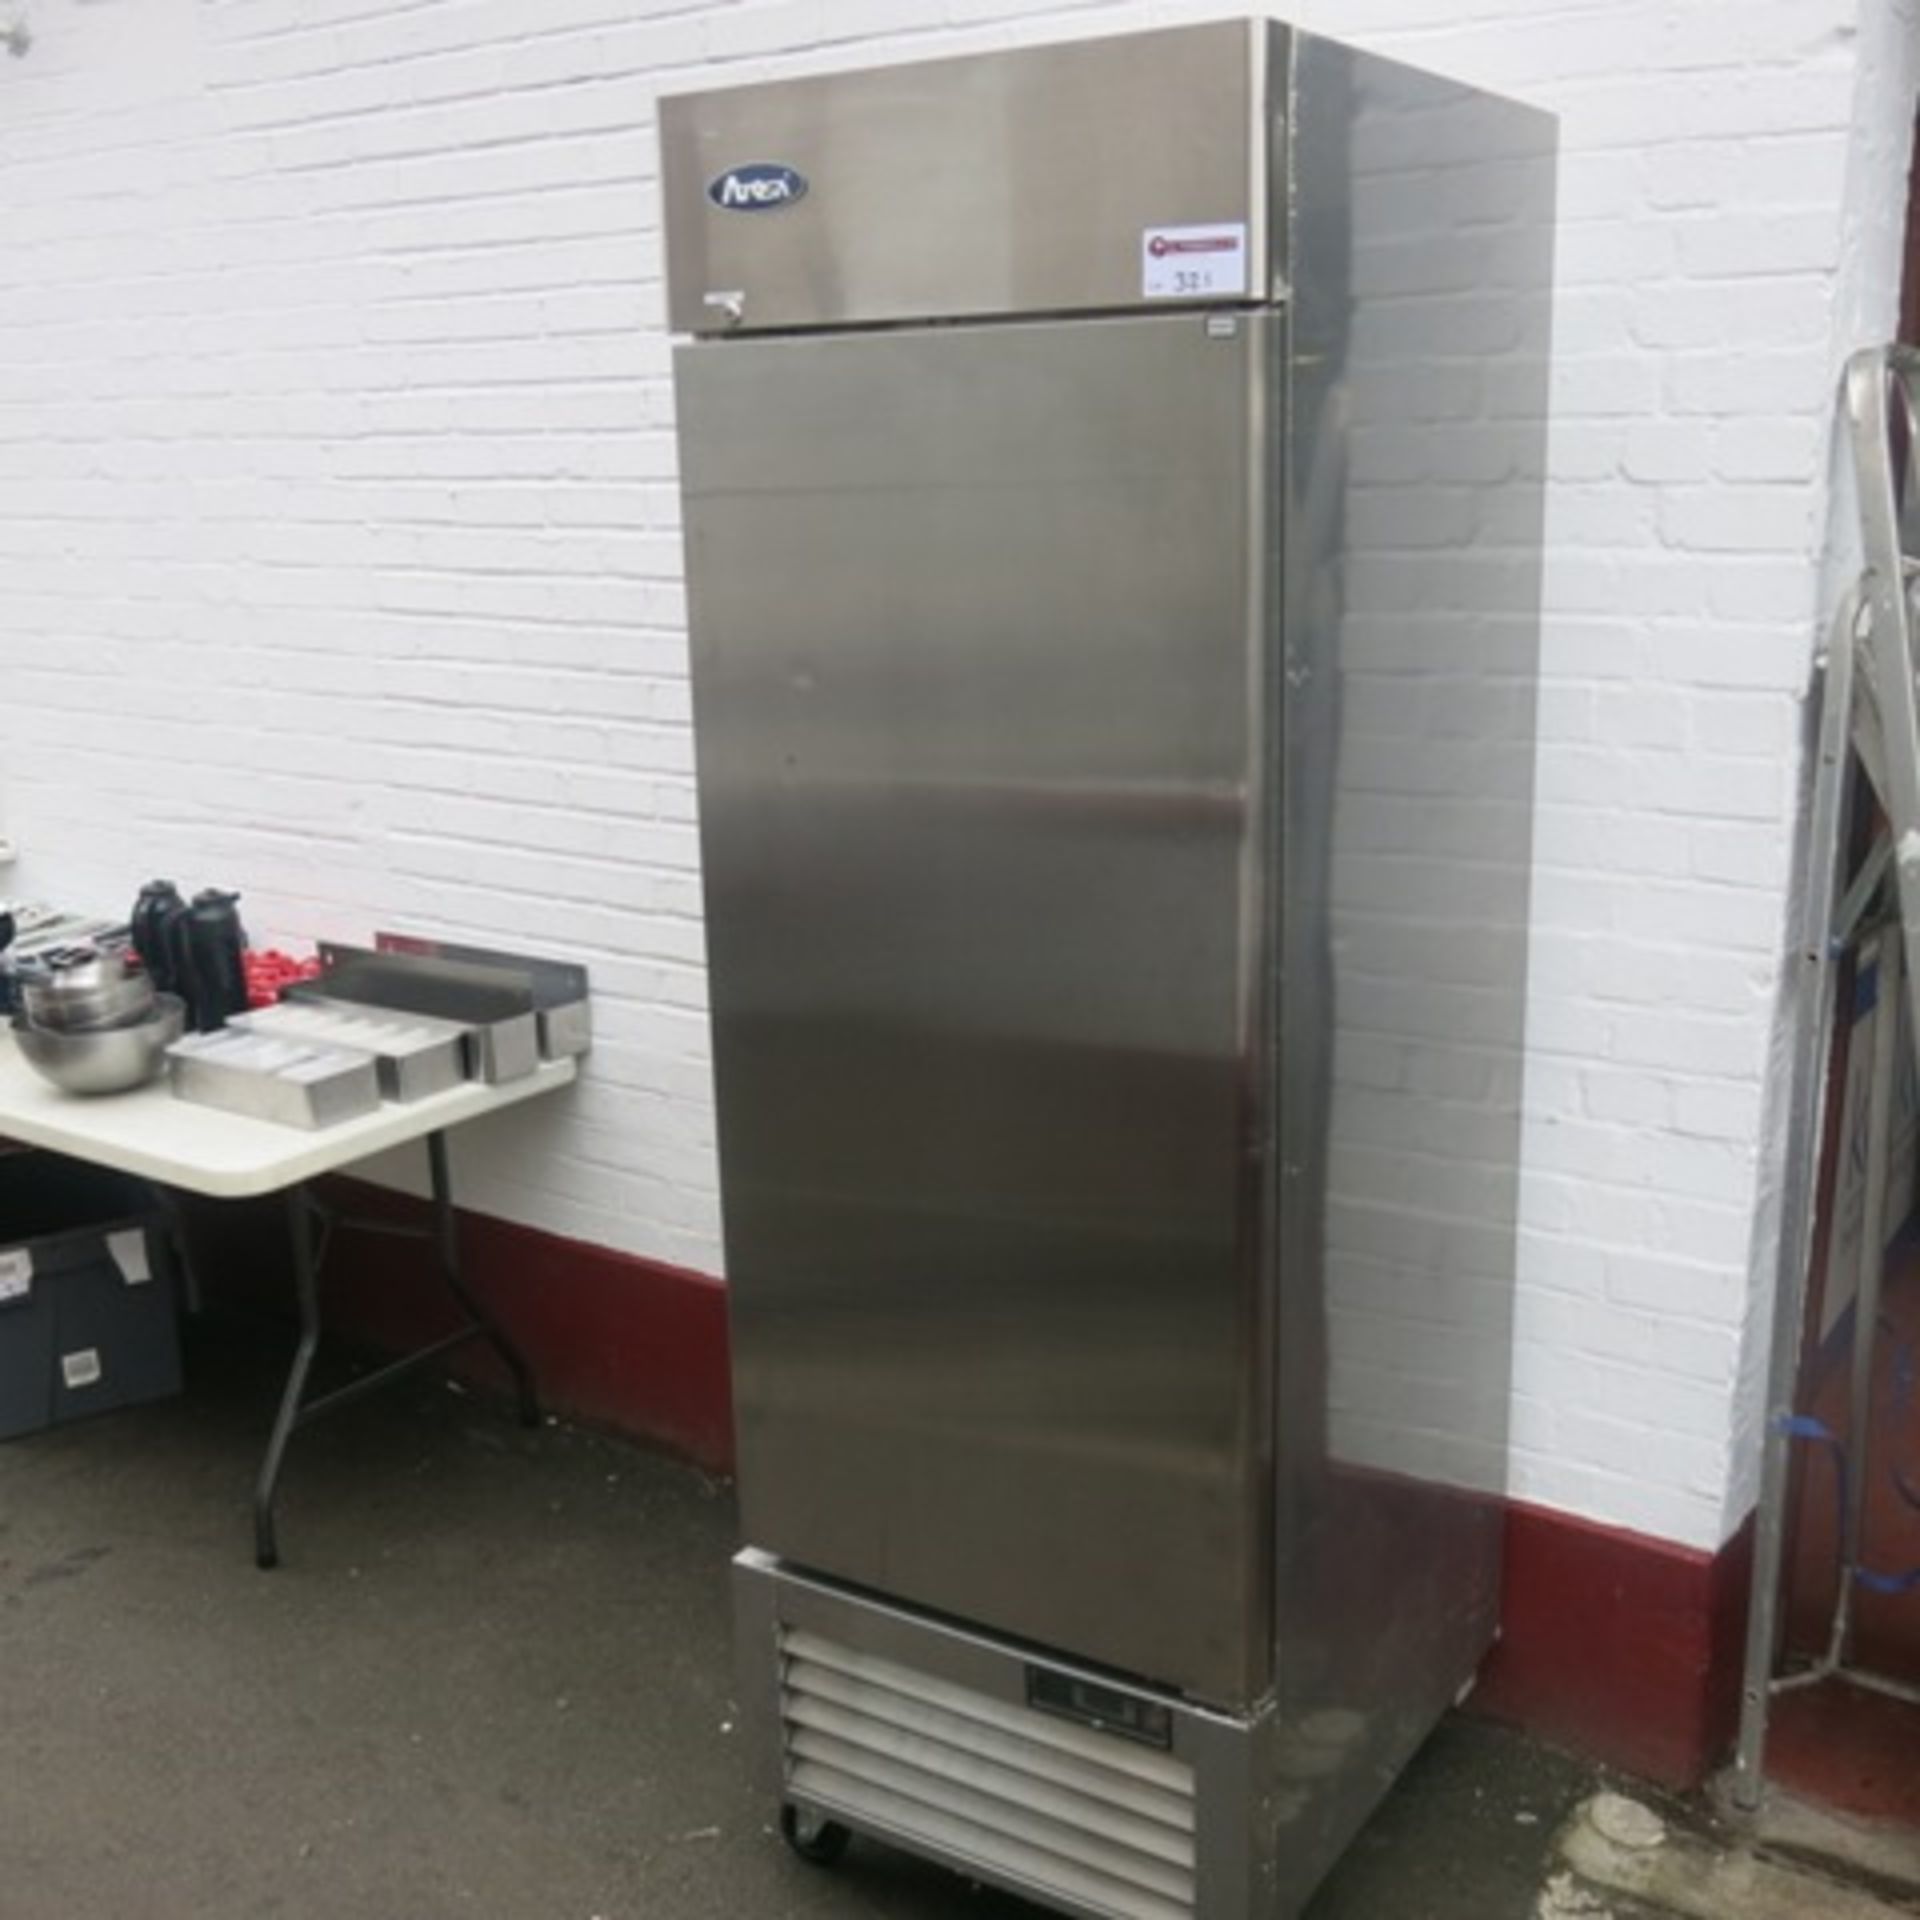 Atosa Stainless Steel Single Door Upright Refrigerator, Model MBL8950. Size (H) 210cm x (D) 80cm